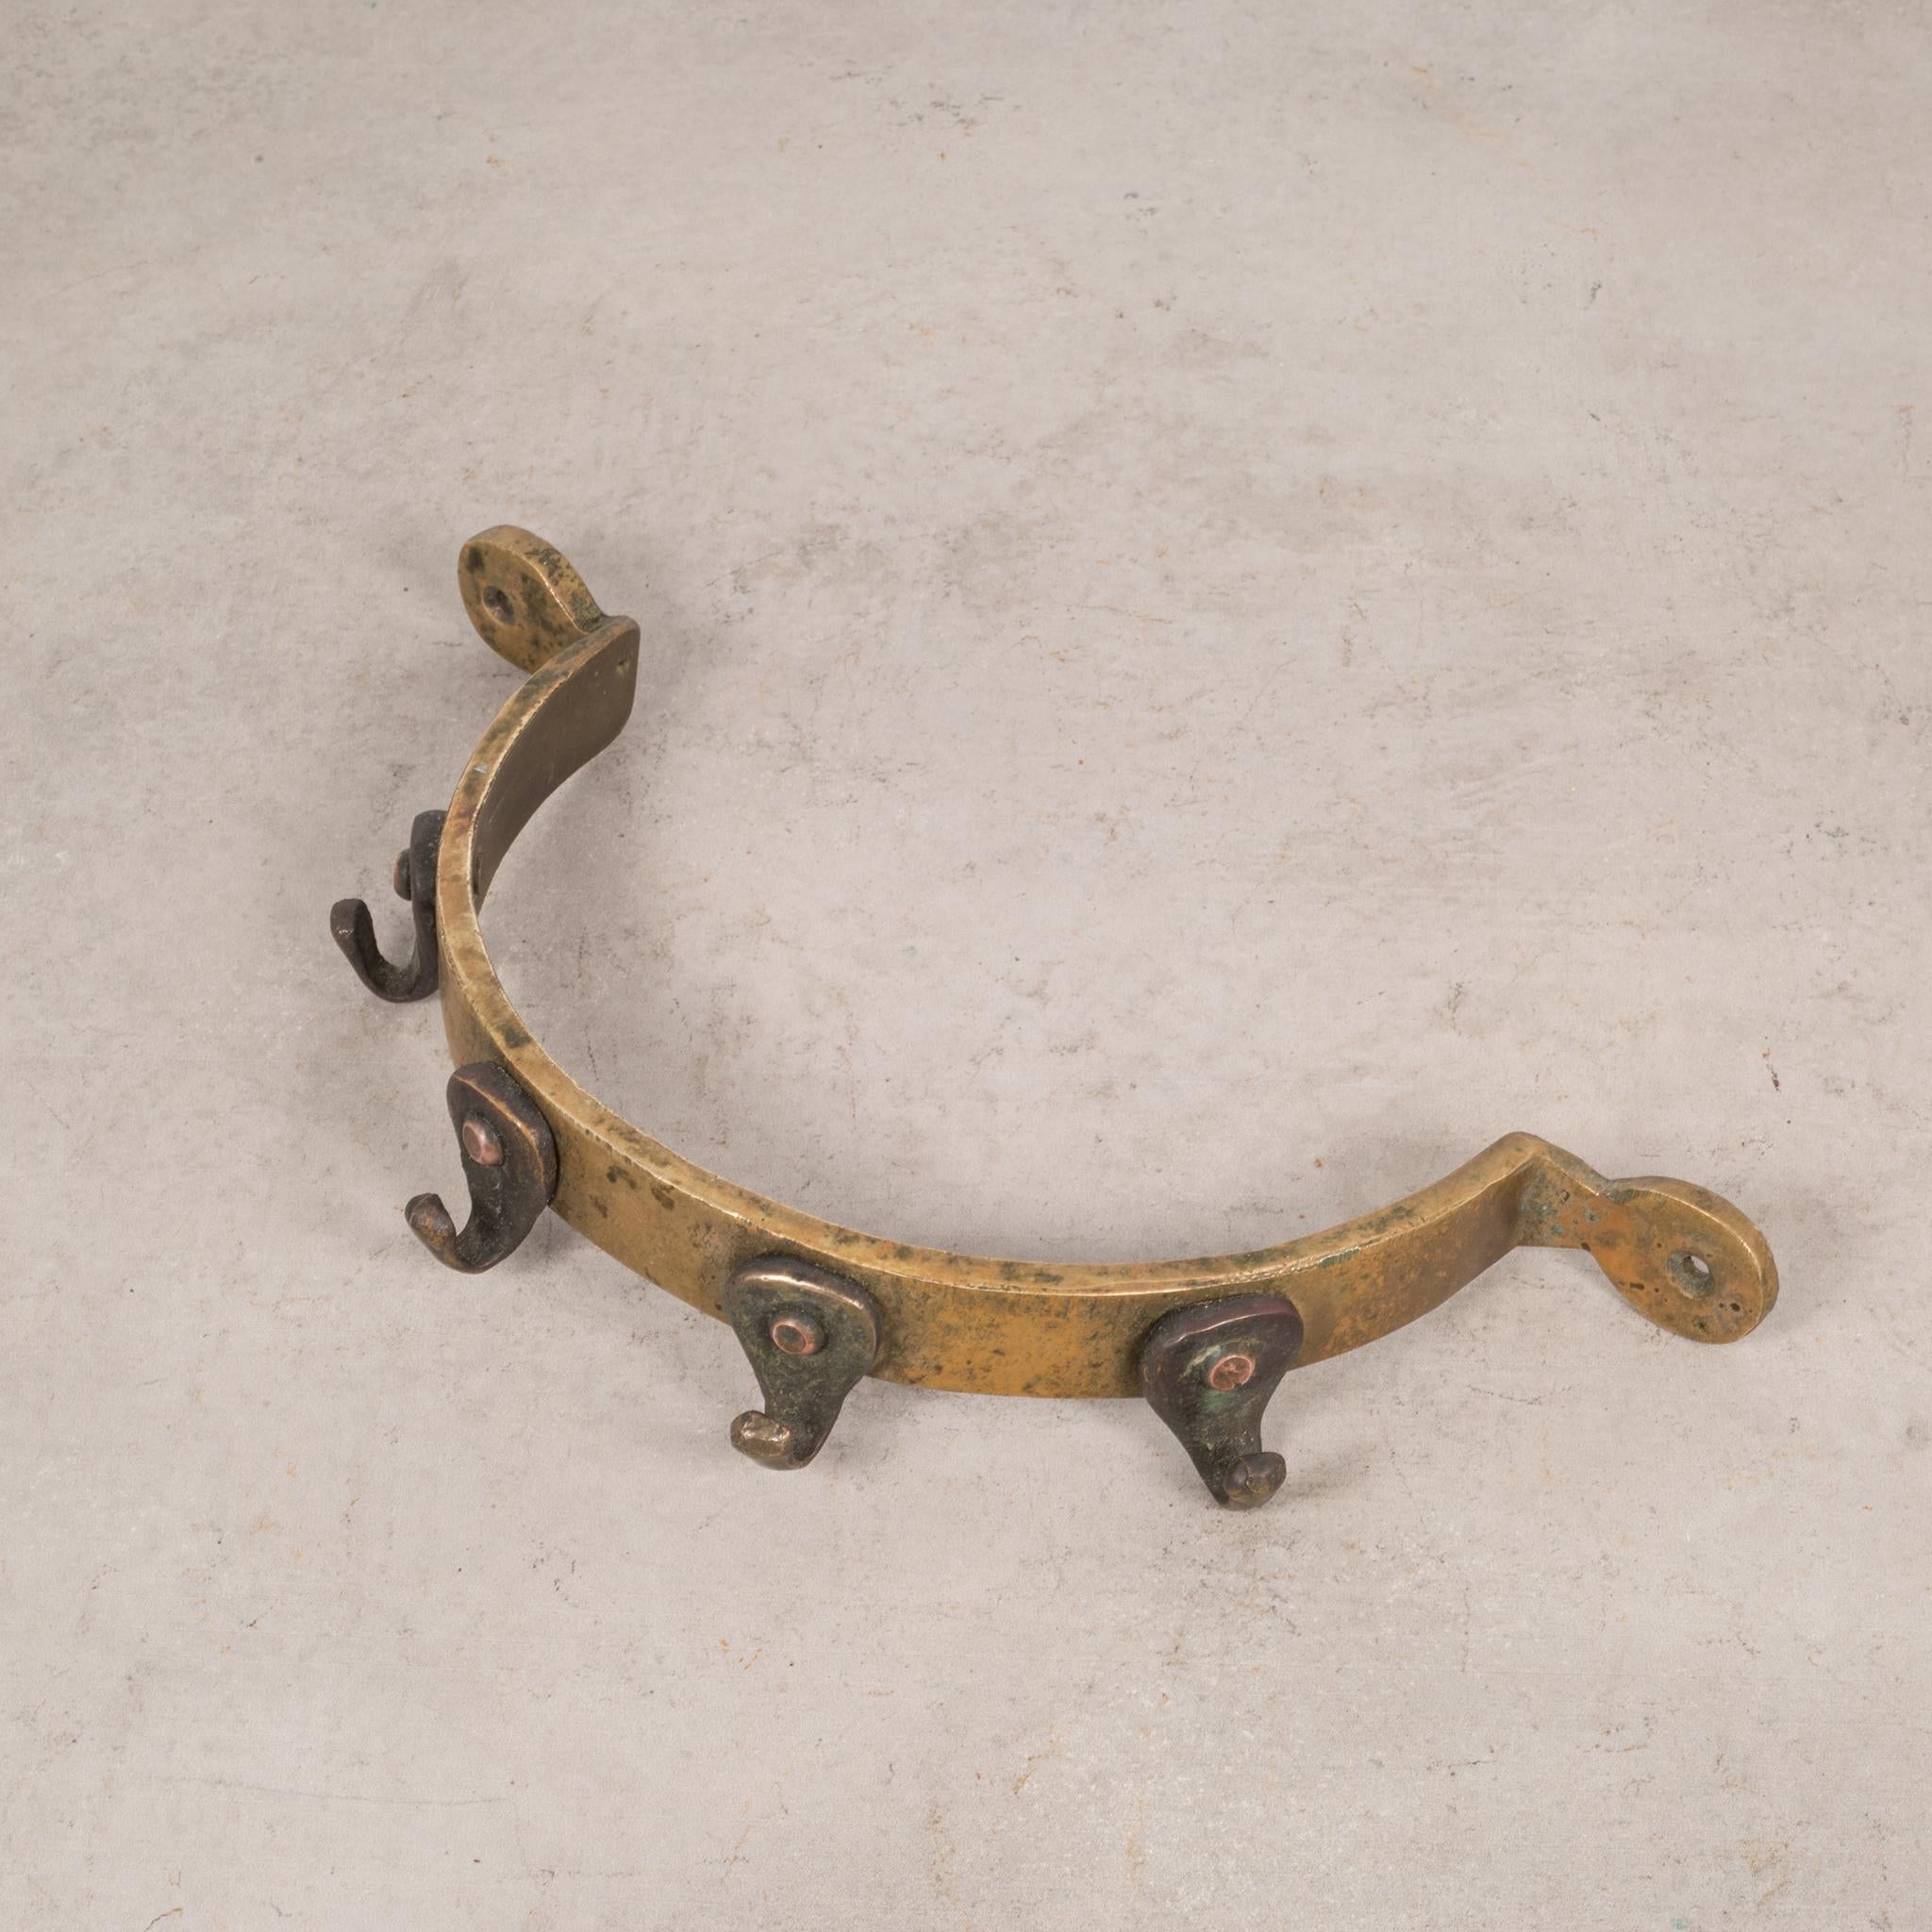 ABOUT

An antique bronze half circle pot rack with four copper hooks.

 CREATOR Unknown.
 DATE OF MANUFACTURE c.1900-1940.
 MATERIALS AND TECHNIQUES Bronze, Copper.
 CONDITION Good. Wear consistent with age and use.
 DIMENSIONS H 2 in. W 12